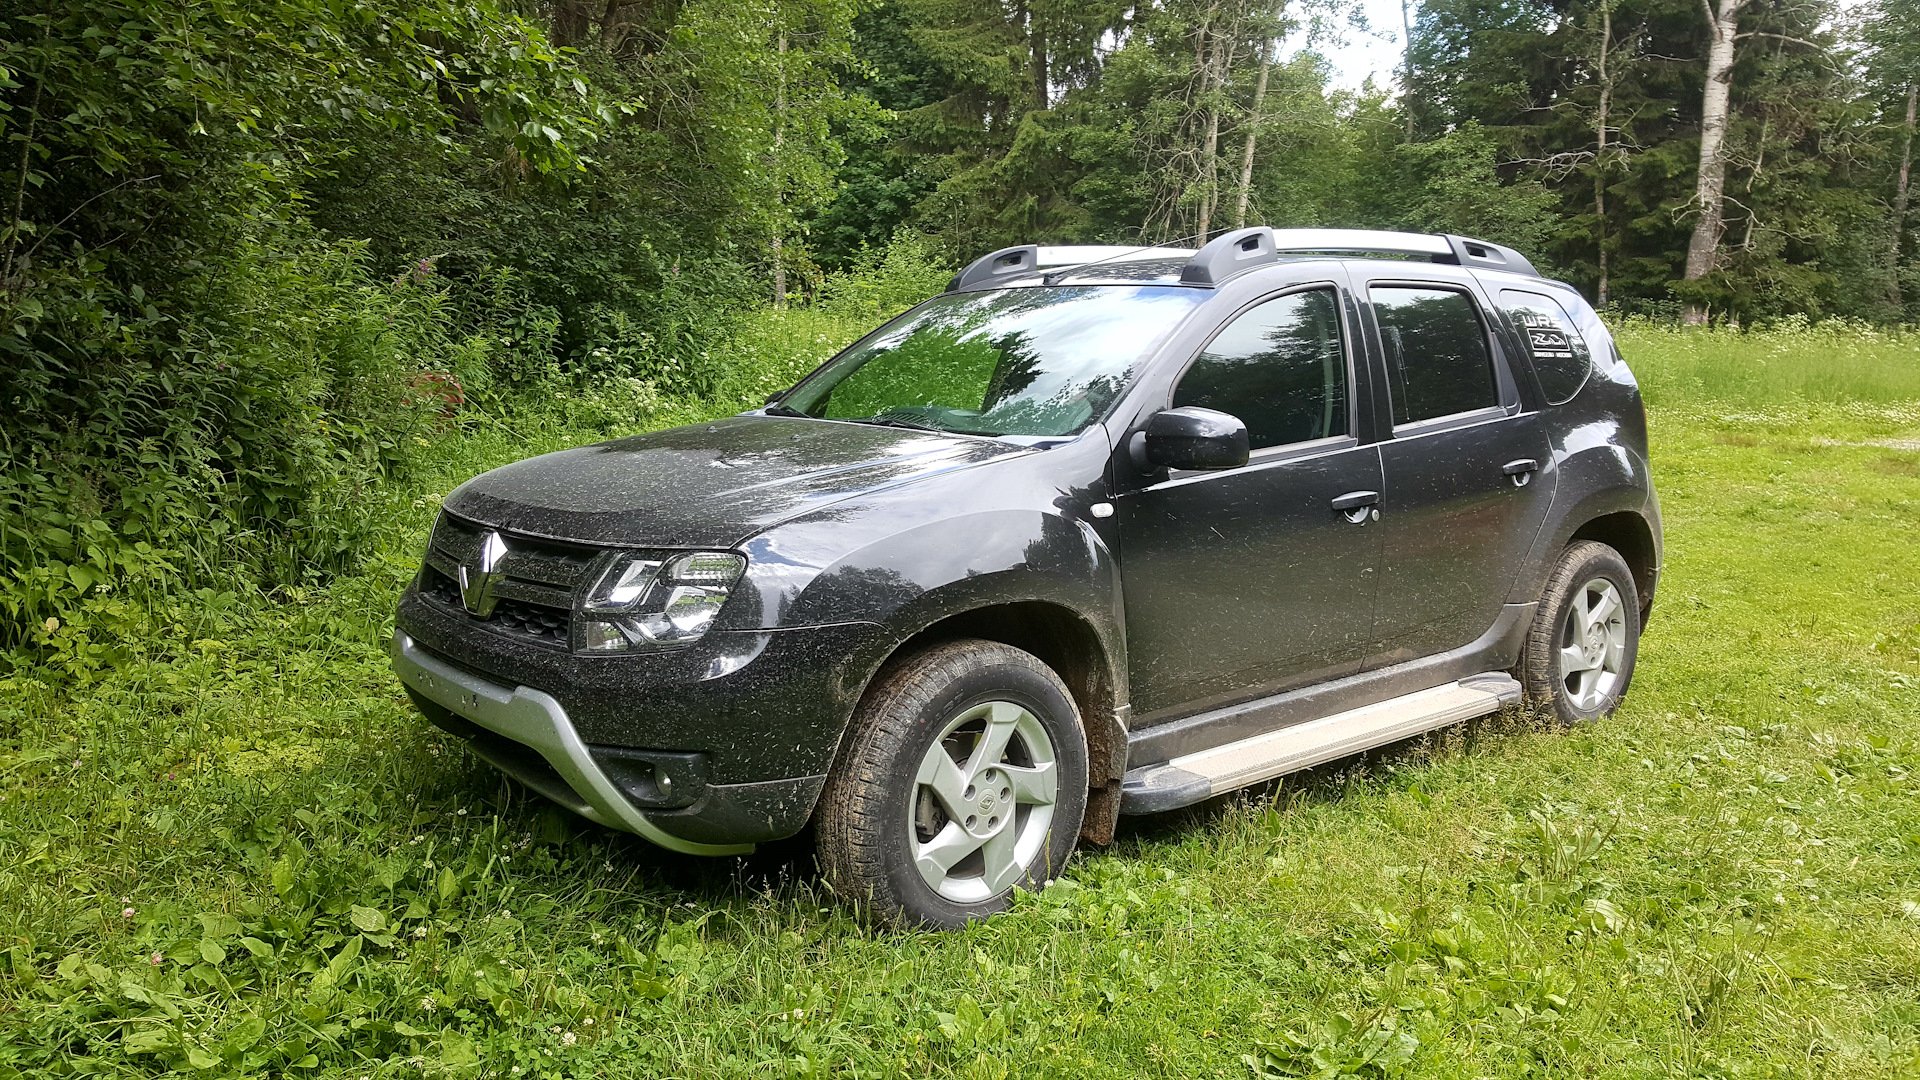 Дастер 4wd 2.0. Renault Duster 2.0 4wd. Рено Дастер 2 0 4х4 механика. Дастер 4 ВД. Duster 2013 2.0 4wd.